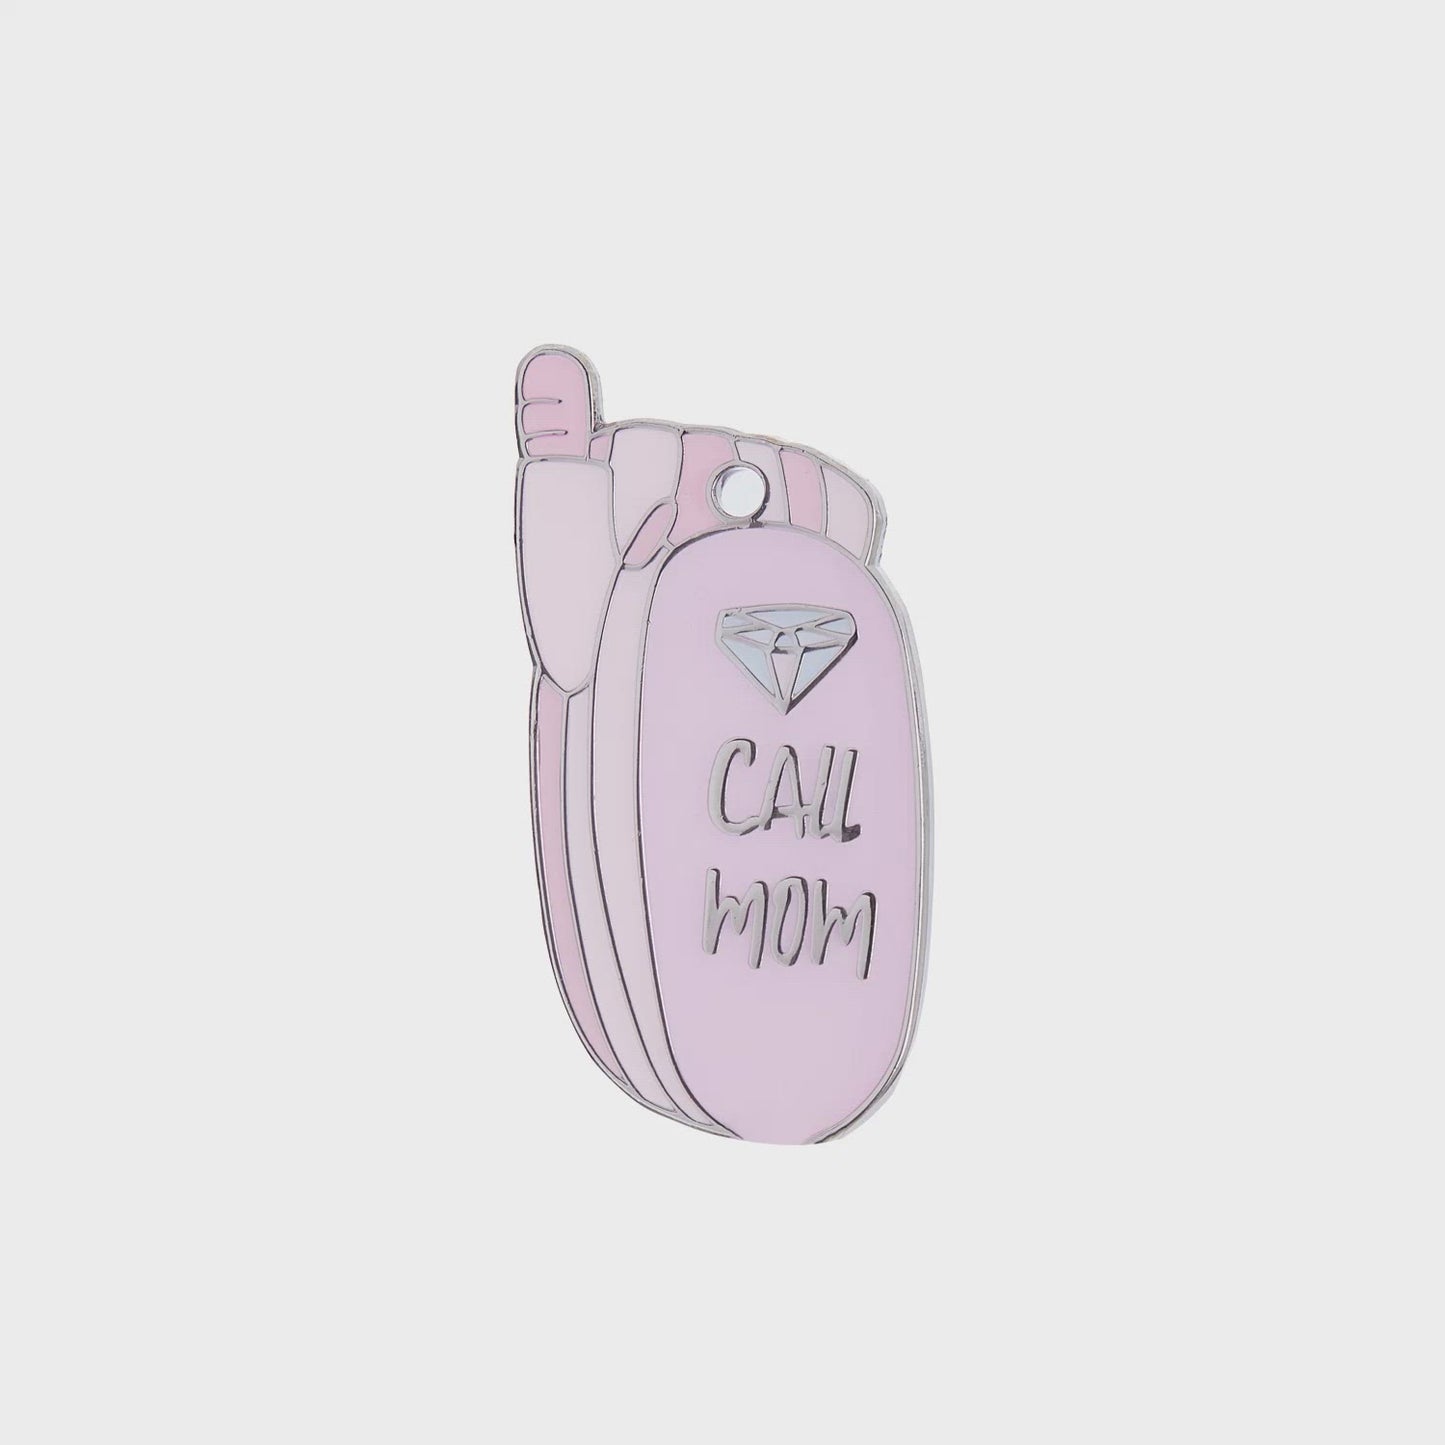 Call Mom Tag - pink and silver enamel pet id tag says call mom | trill paws